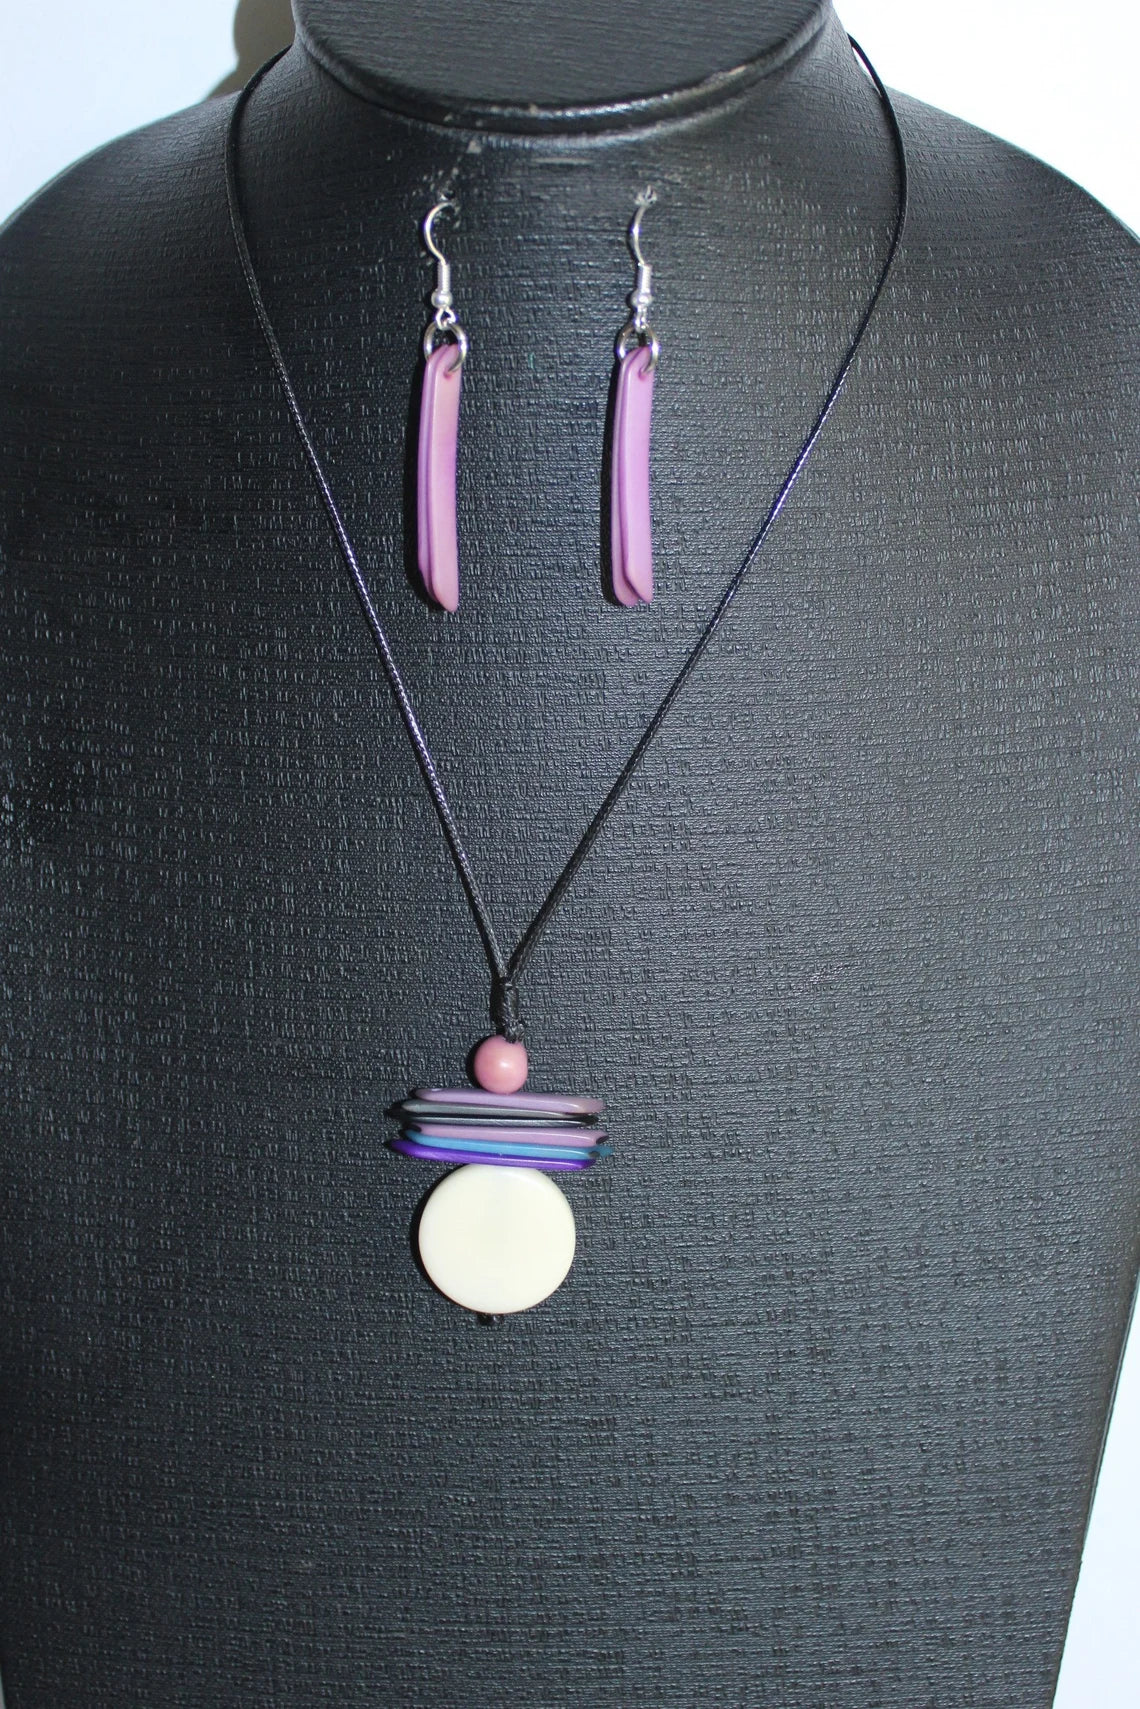 Tagua Pendant Necklace and Earrings Set in White and Purple Color.